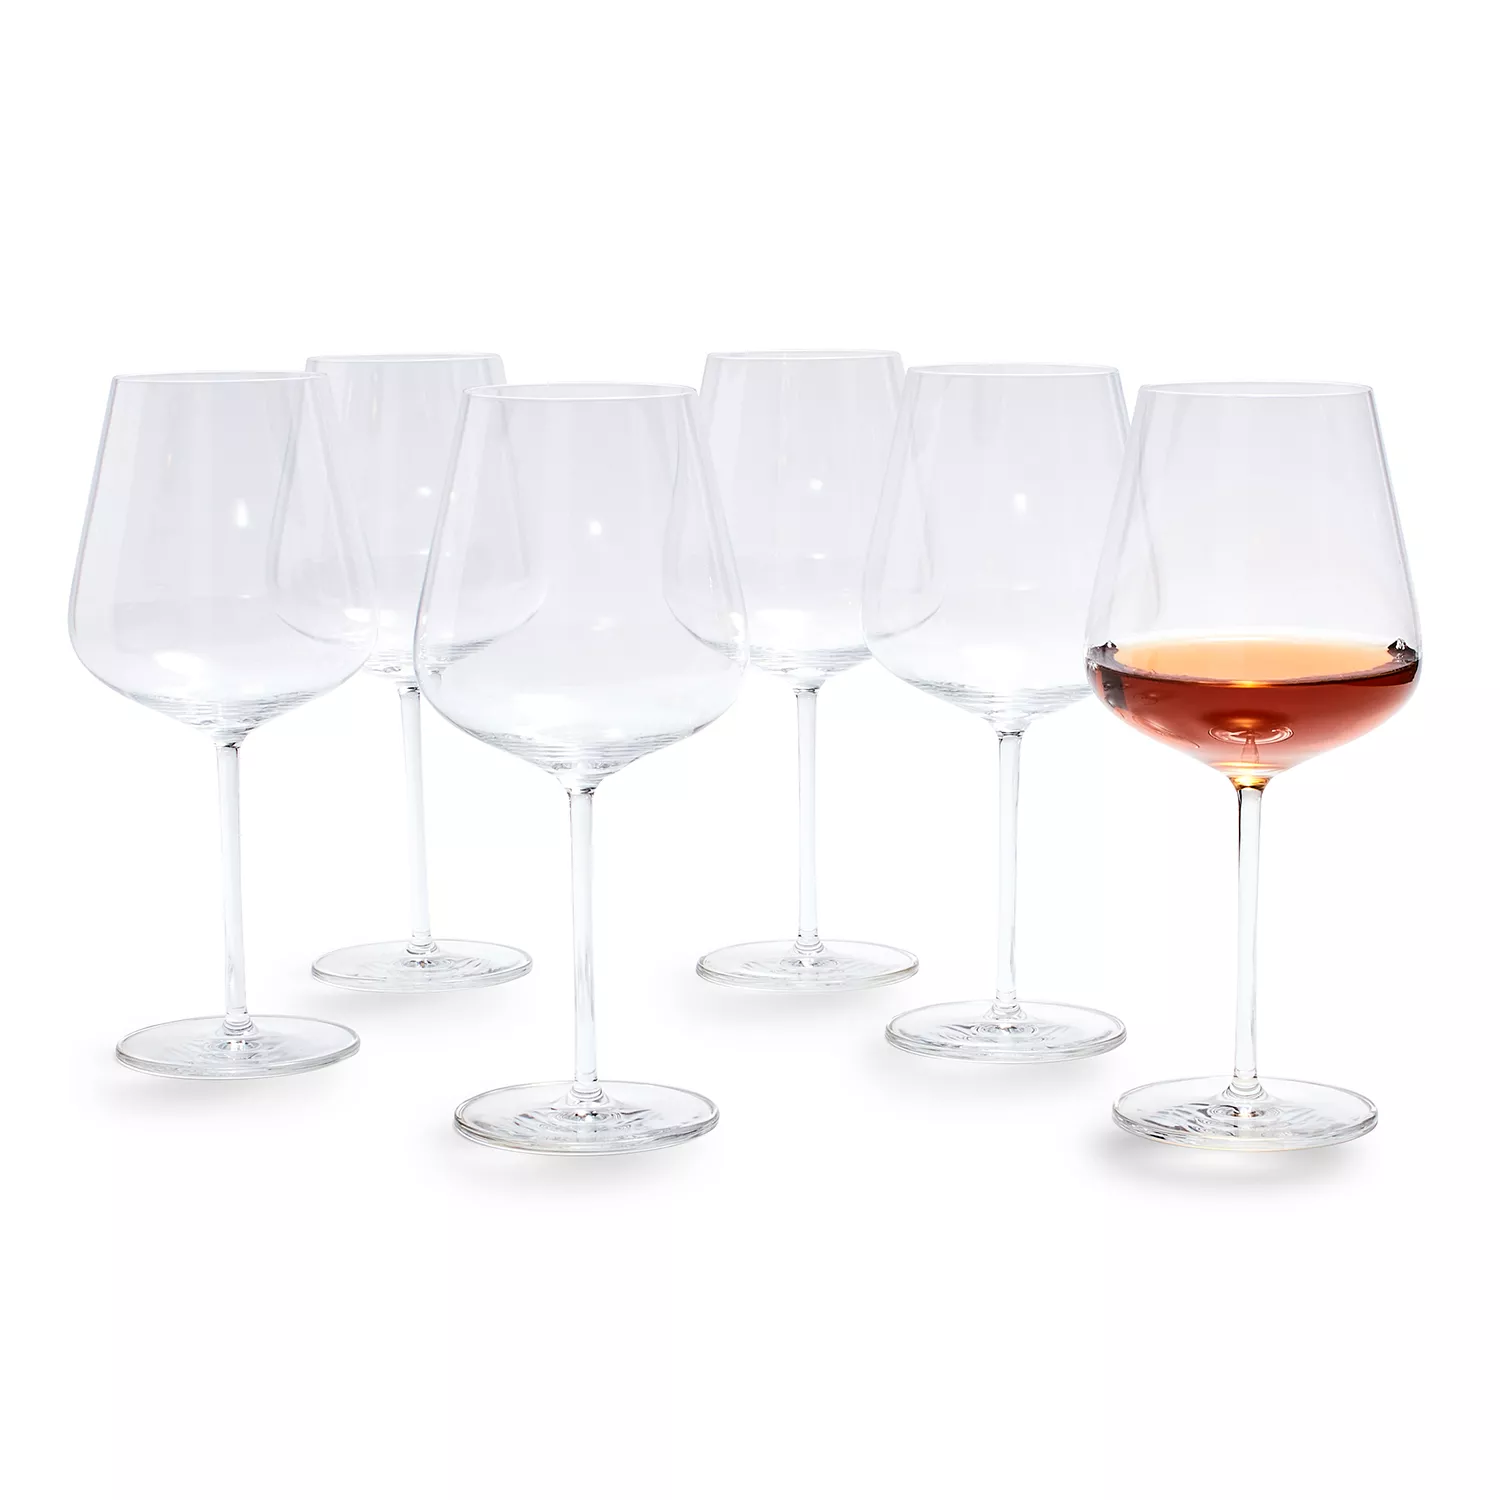 One For All Wine Glass 2 pack - Elemental Spirits Co.